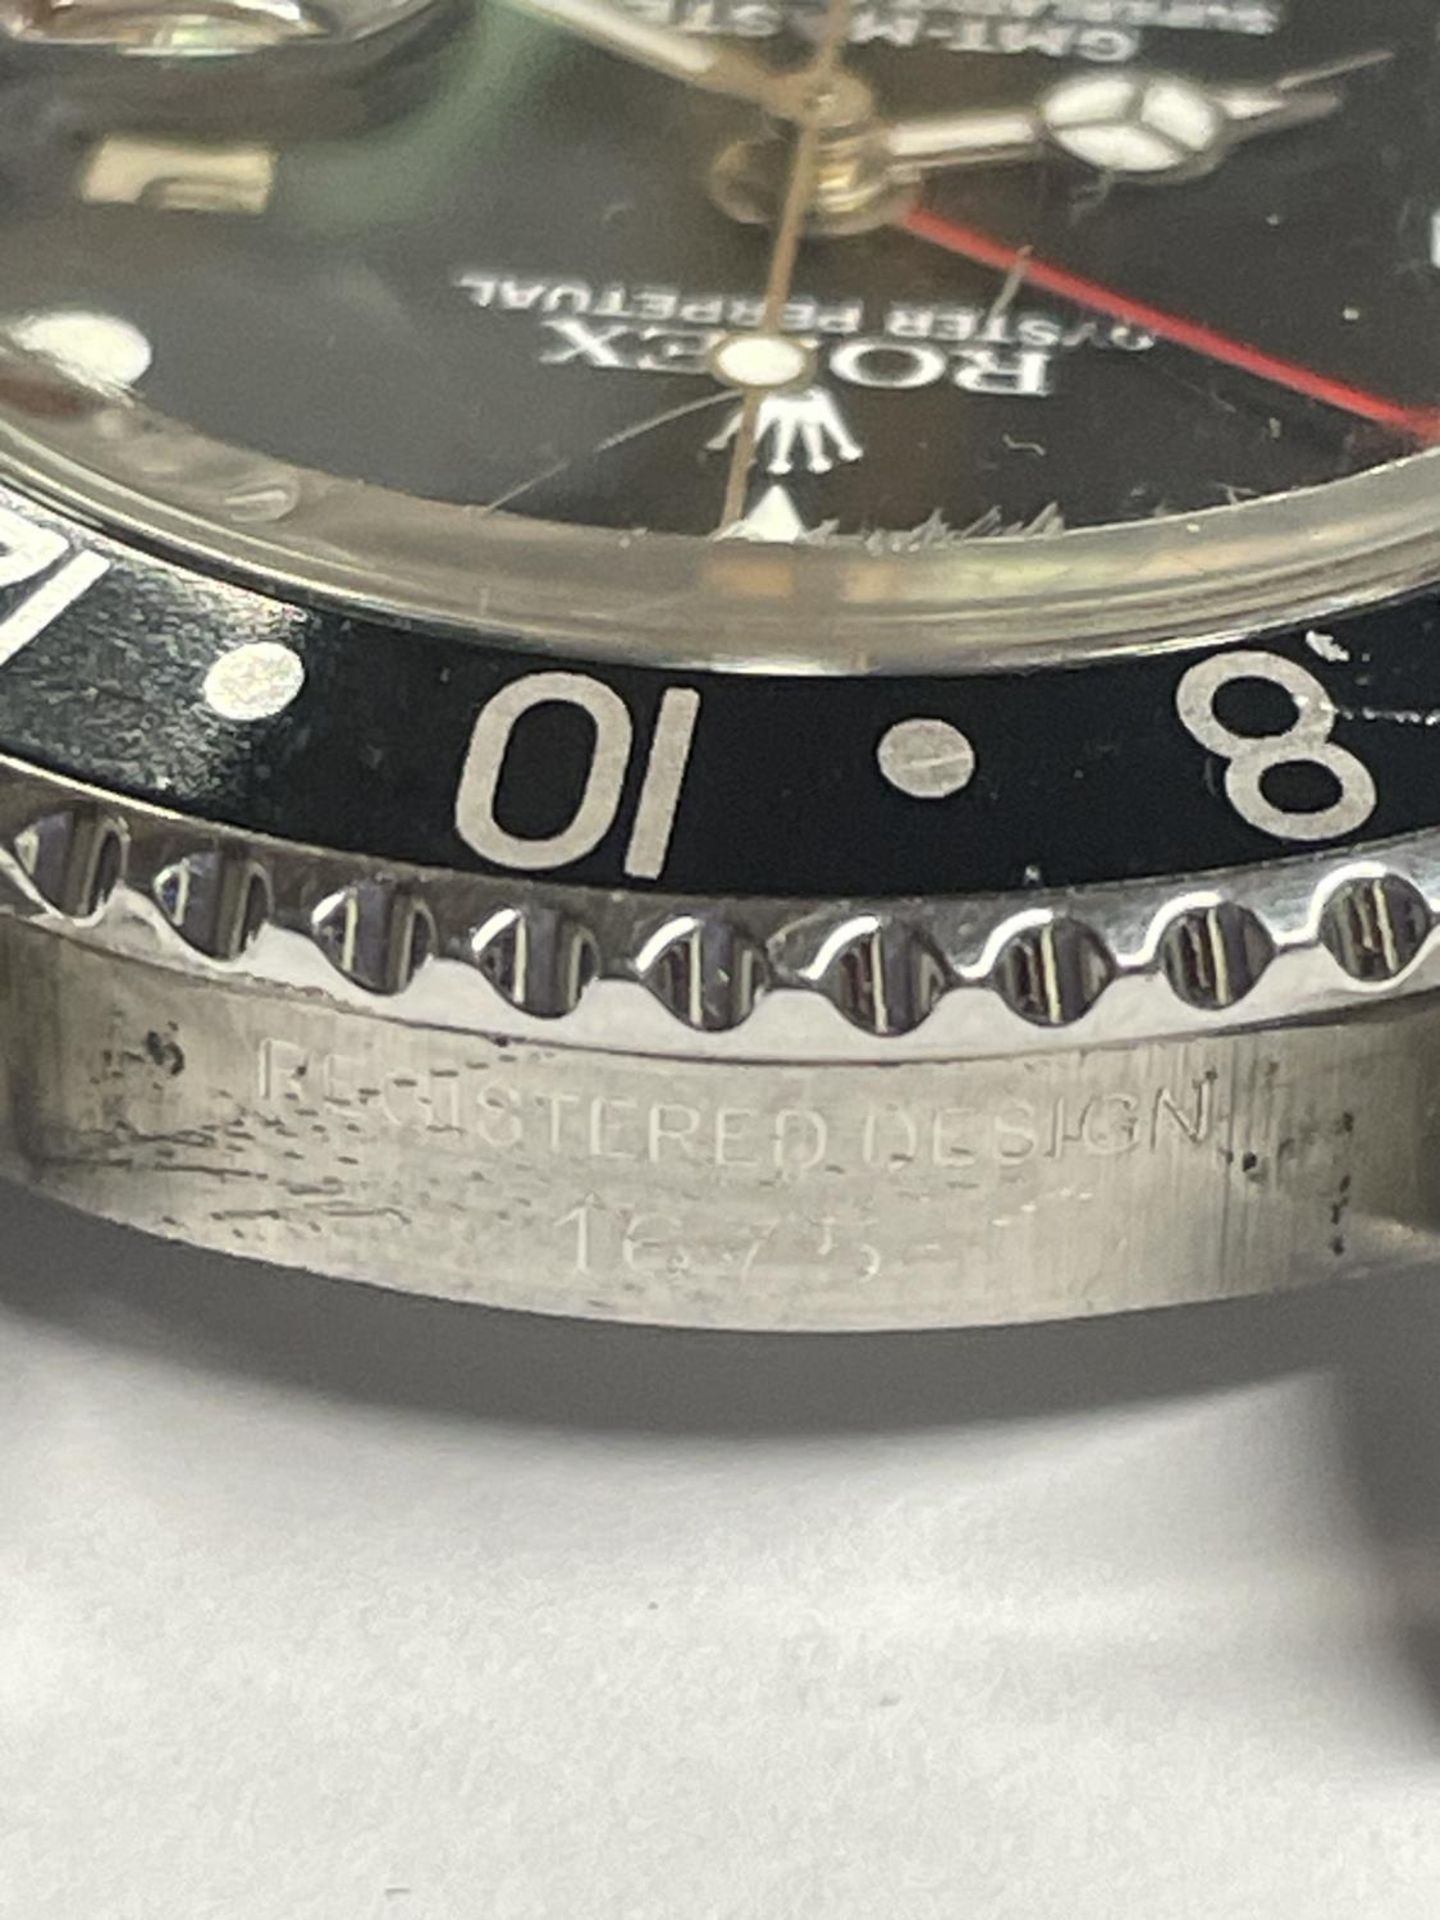 A RARE VINTAGE ROLEX GMT MASTER WITH POINTED CROWN GUARDS REF 1675 WITH EXTRAS TO INCLUDE A ROLEX - Image 11 of 18